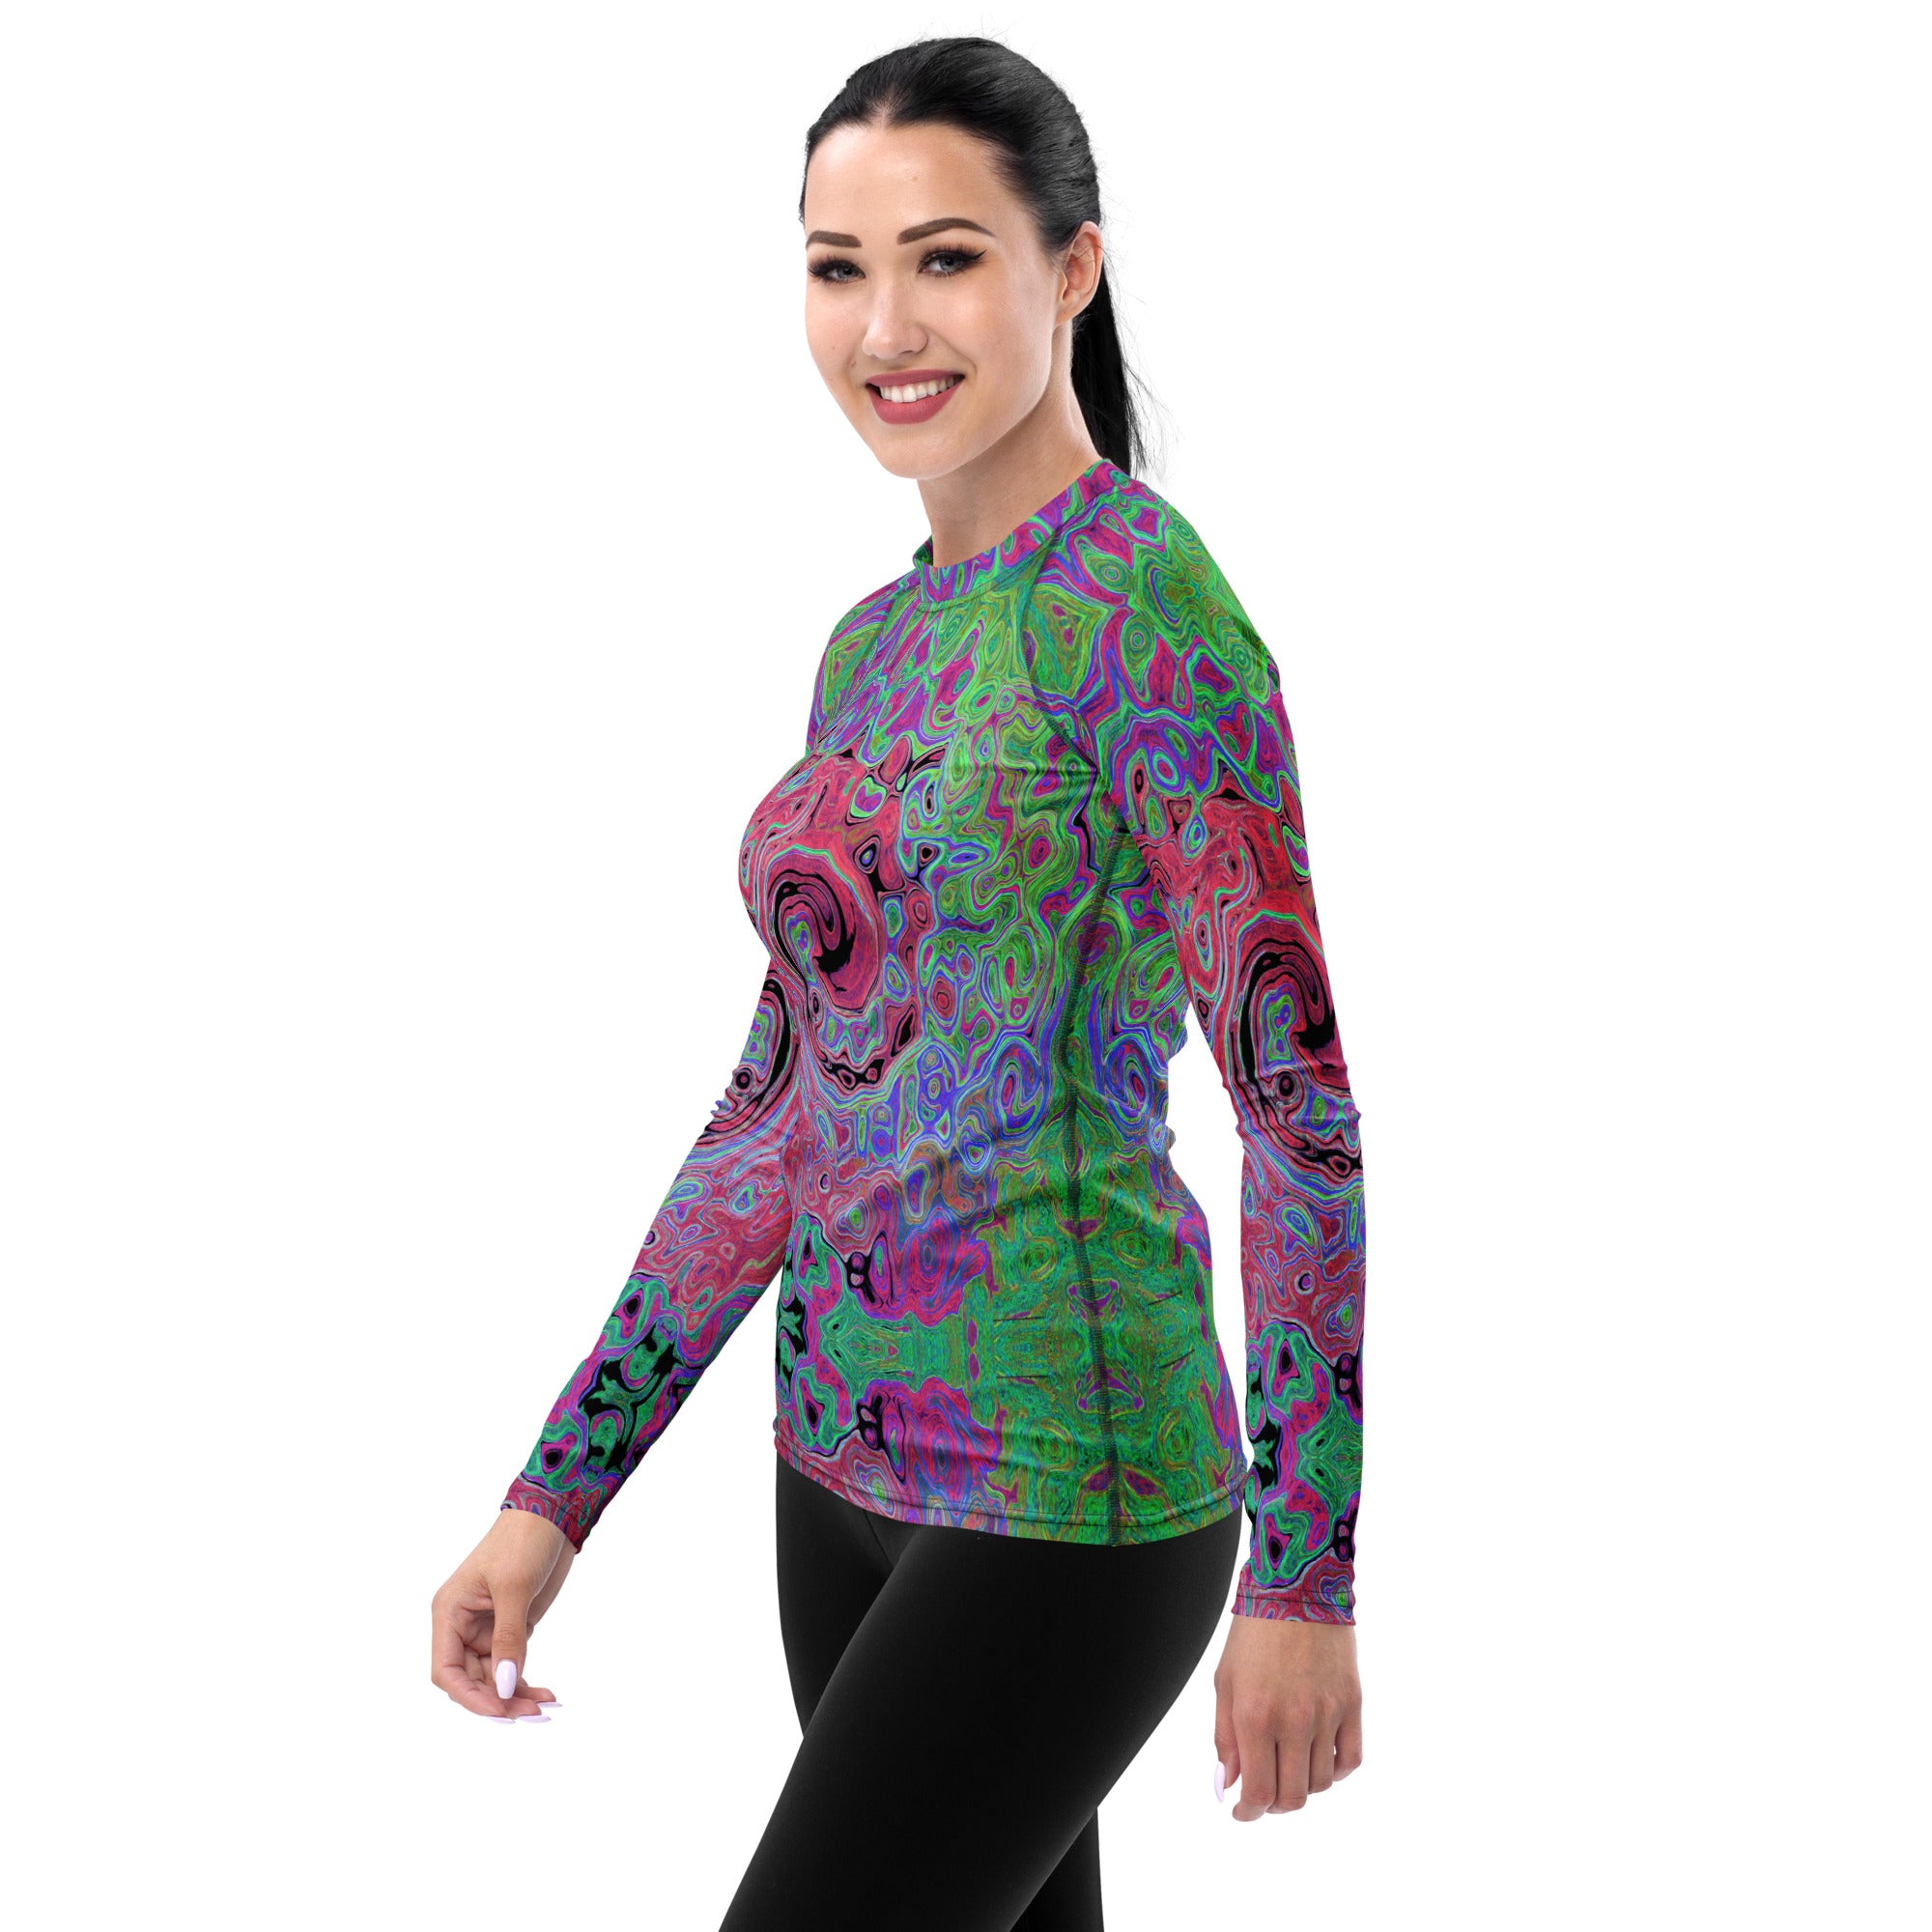 Women's Rash Guard Shirts - Pink and Lime Green Groovy Abstract Retro Swirl